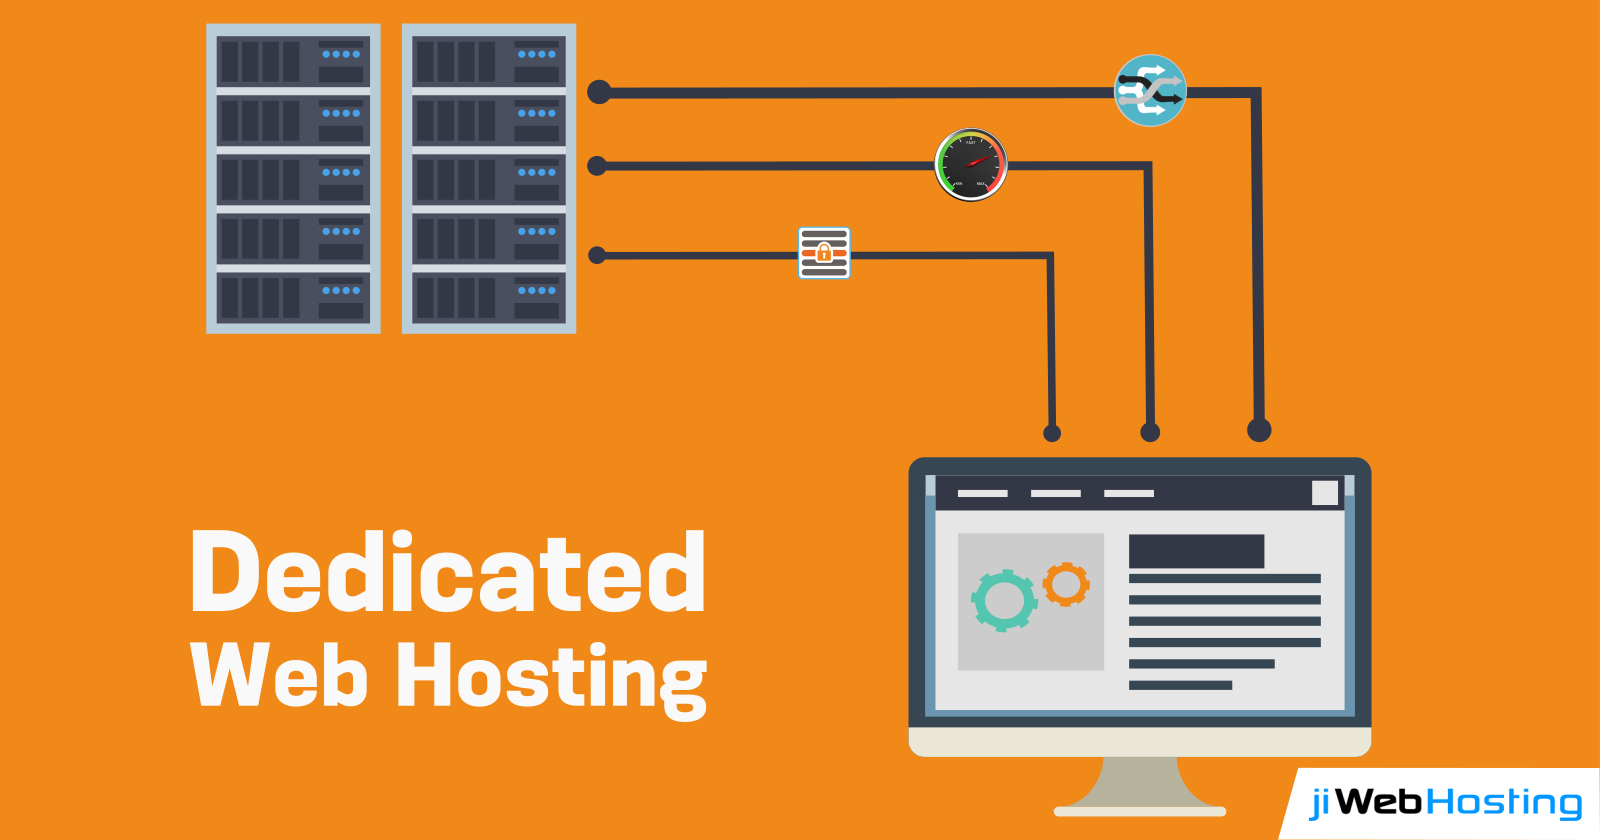 A Complete Guide to Dedicated Web Hosting